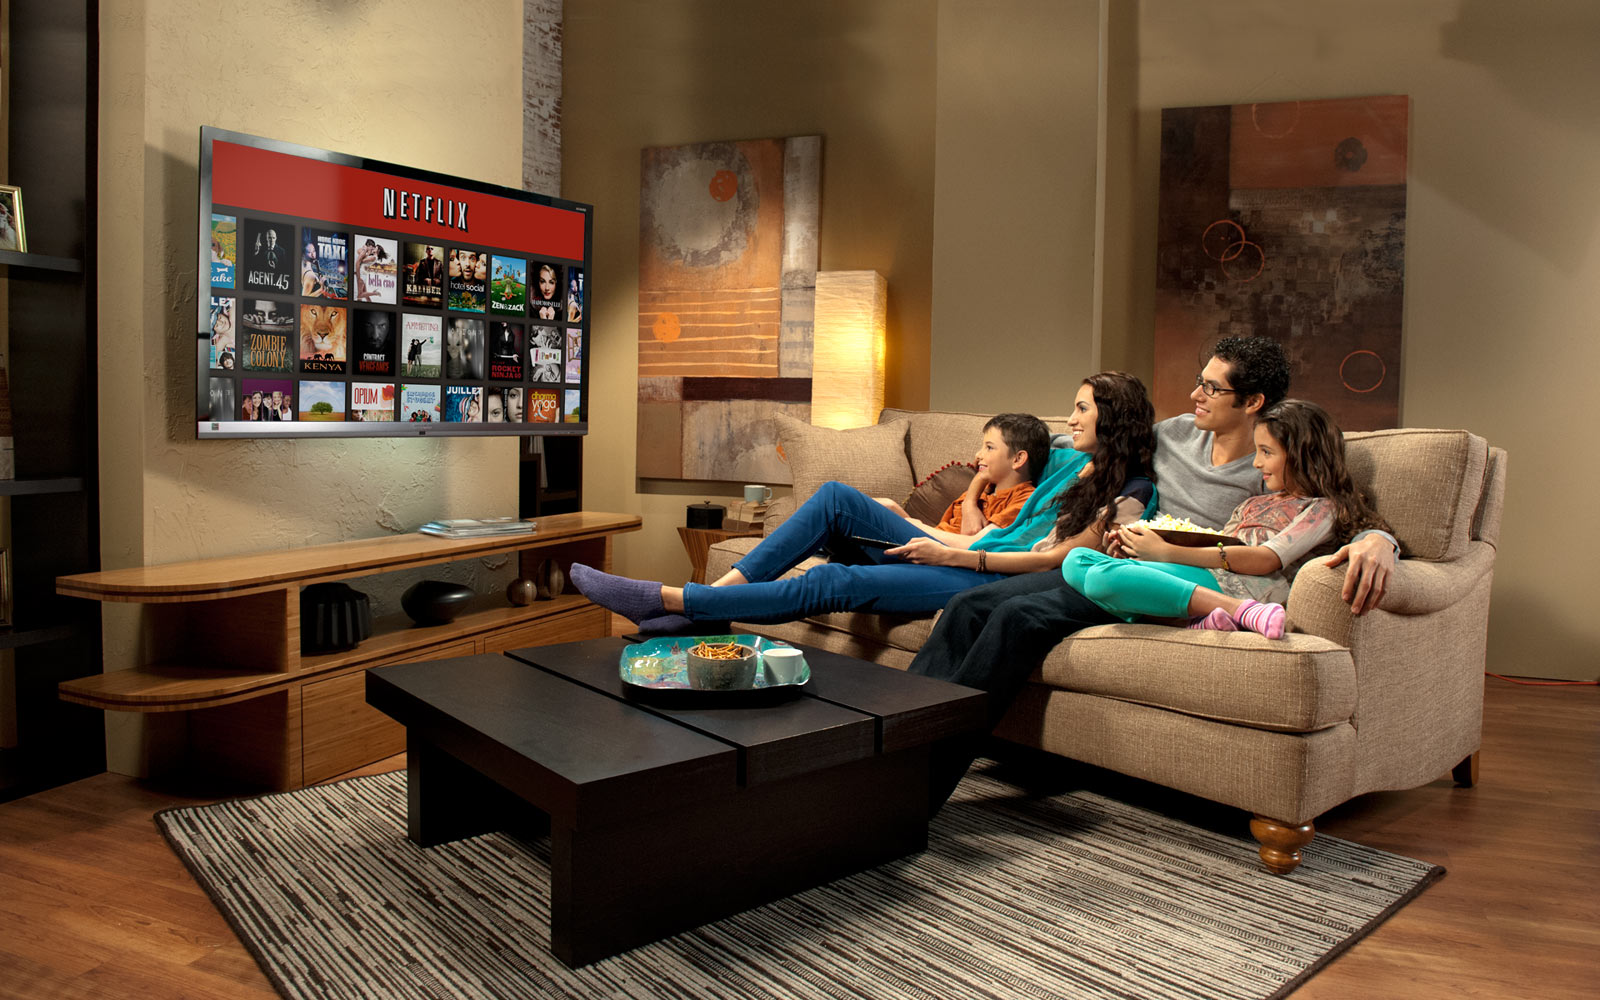 Most Americans Prefer Streaming Their Favorite Shows Online Over Watching on Traditional TV